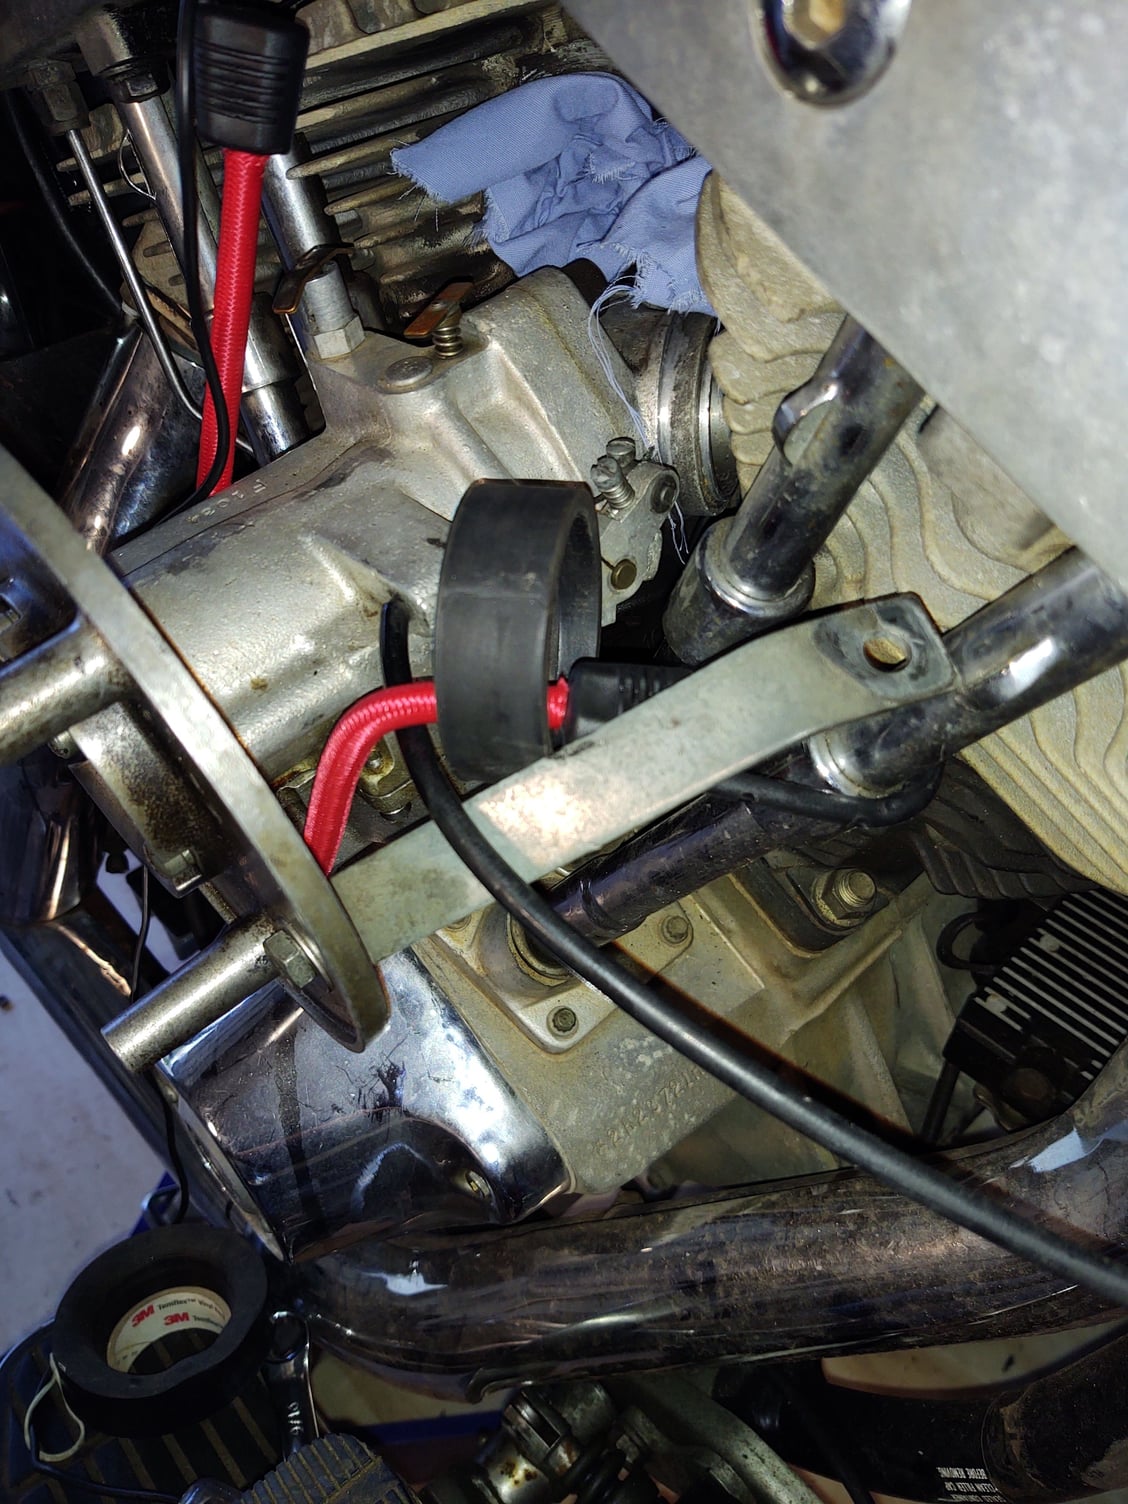 FLH wiring problems - Page 5 - Harley Davidson Forums